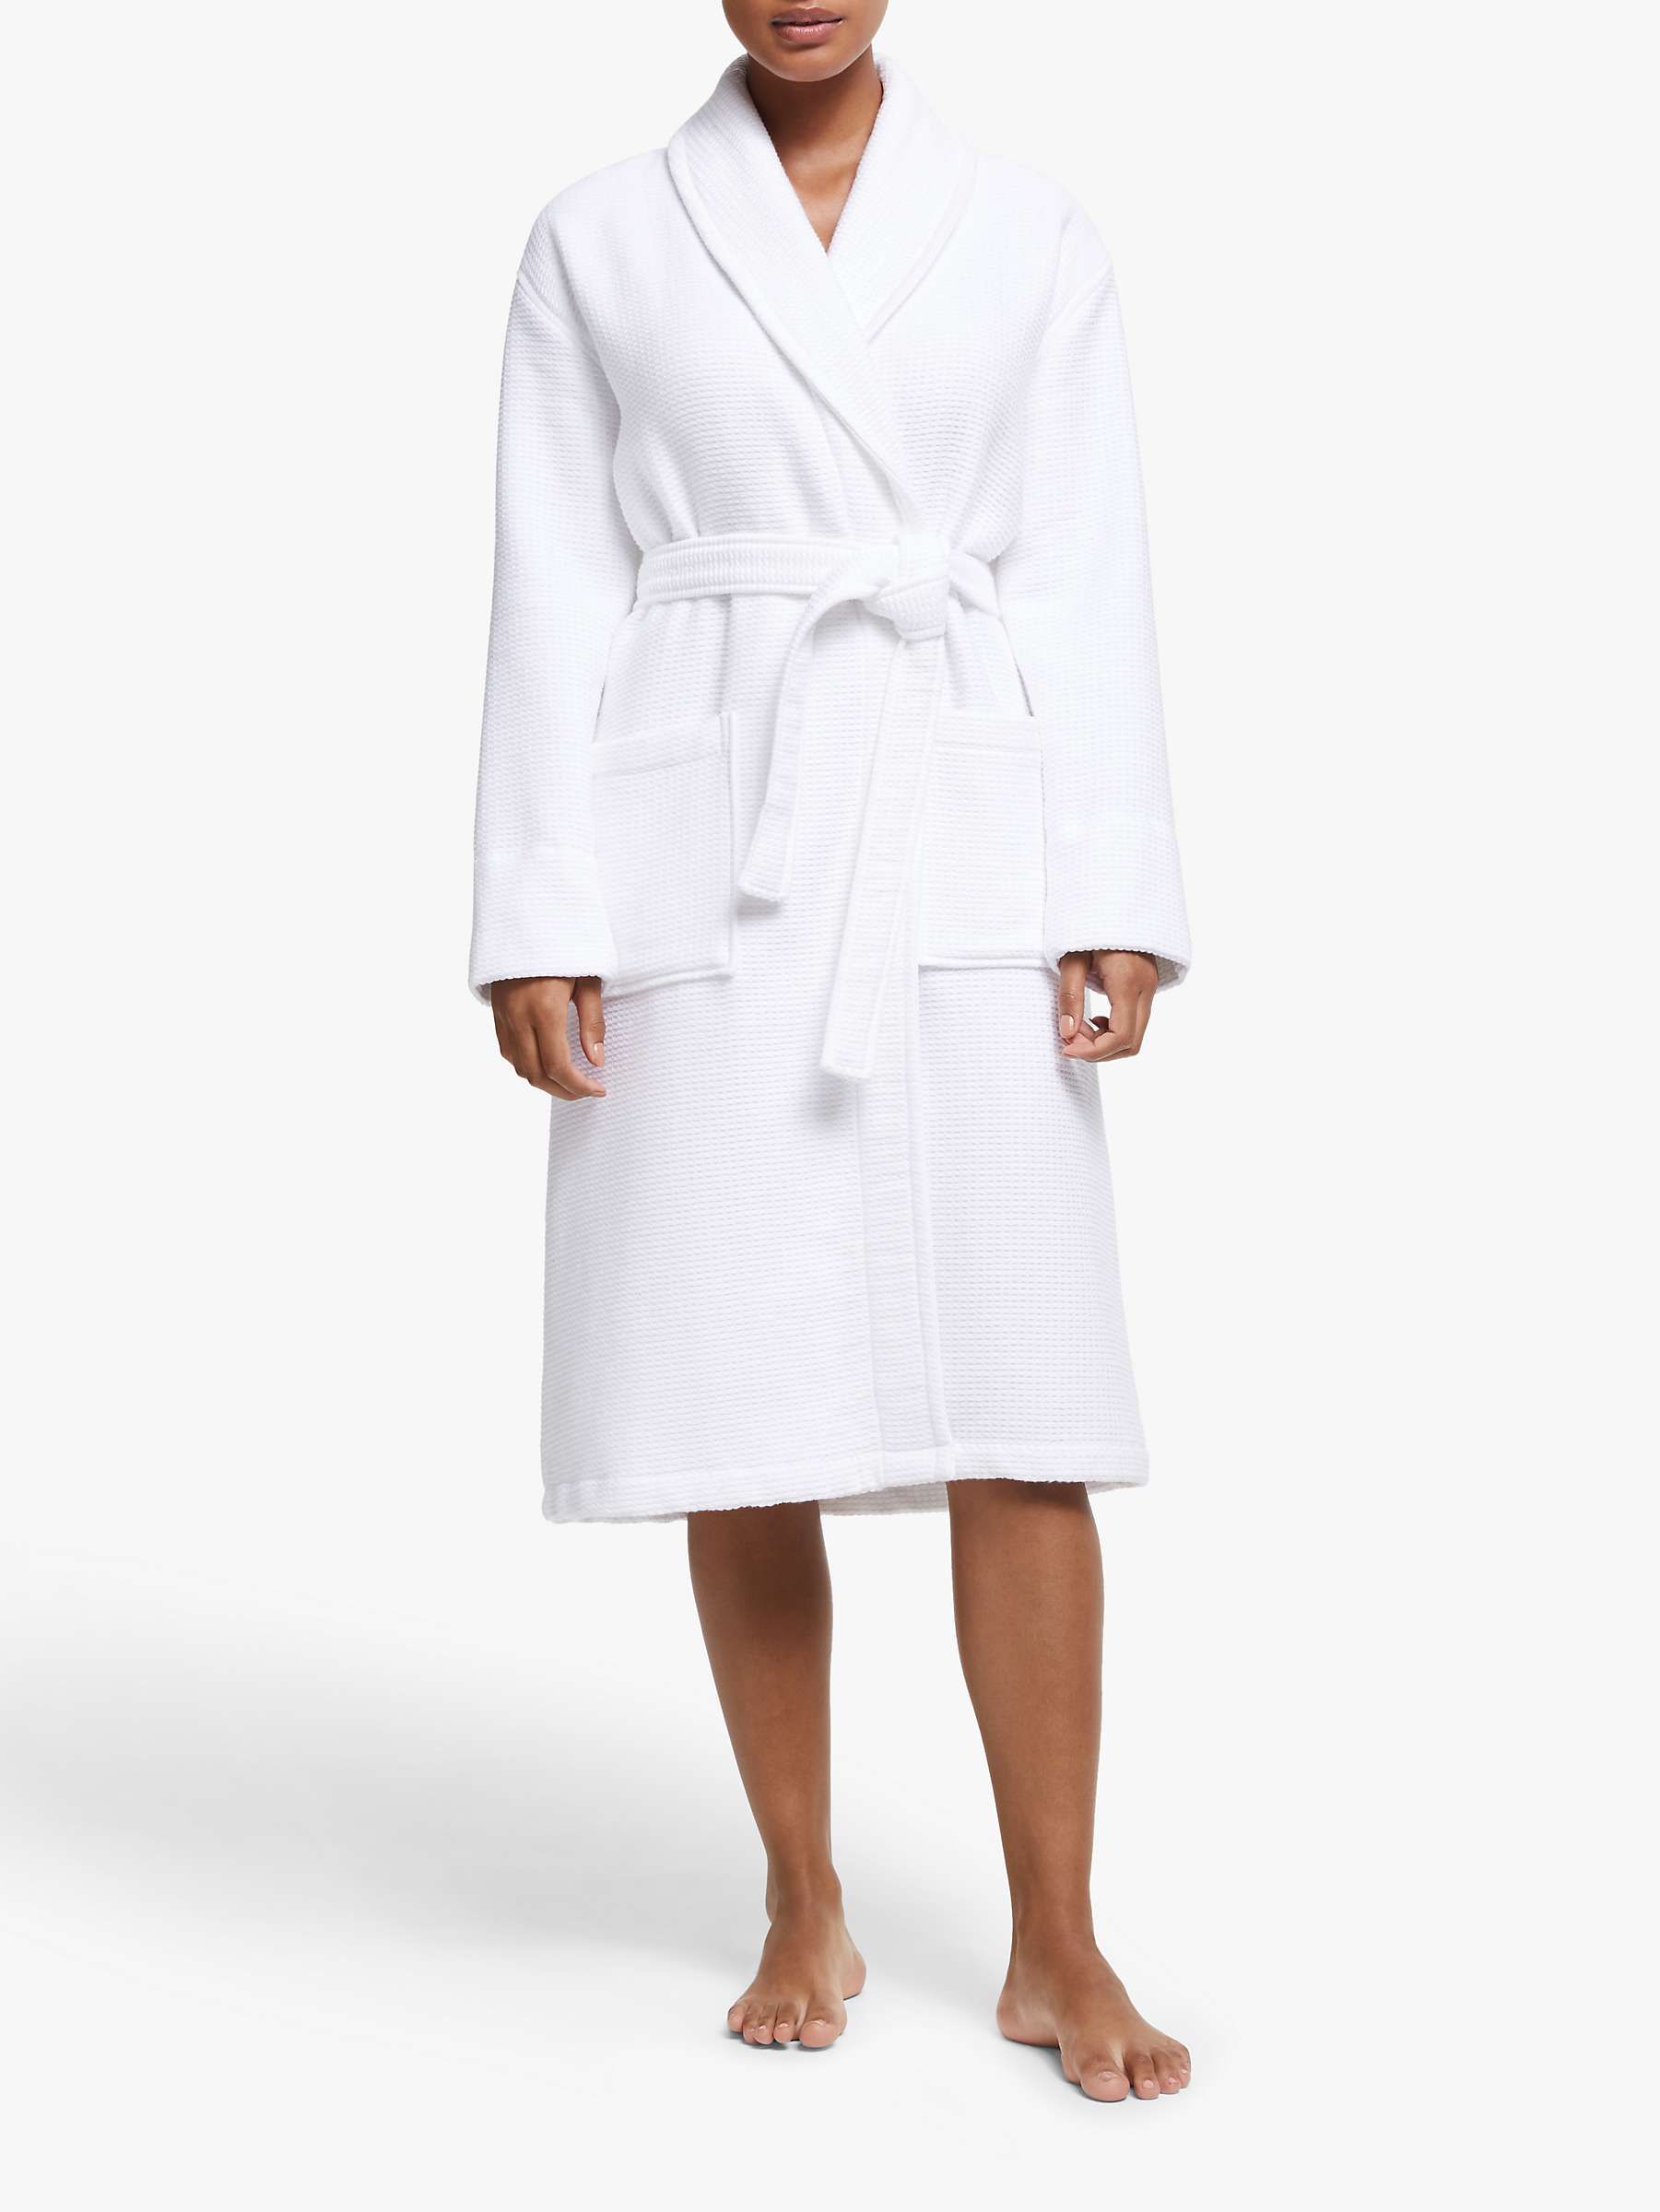 very ladies dressing gowns